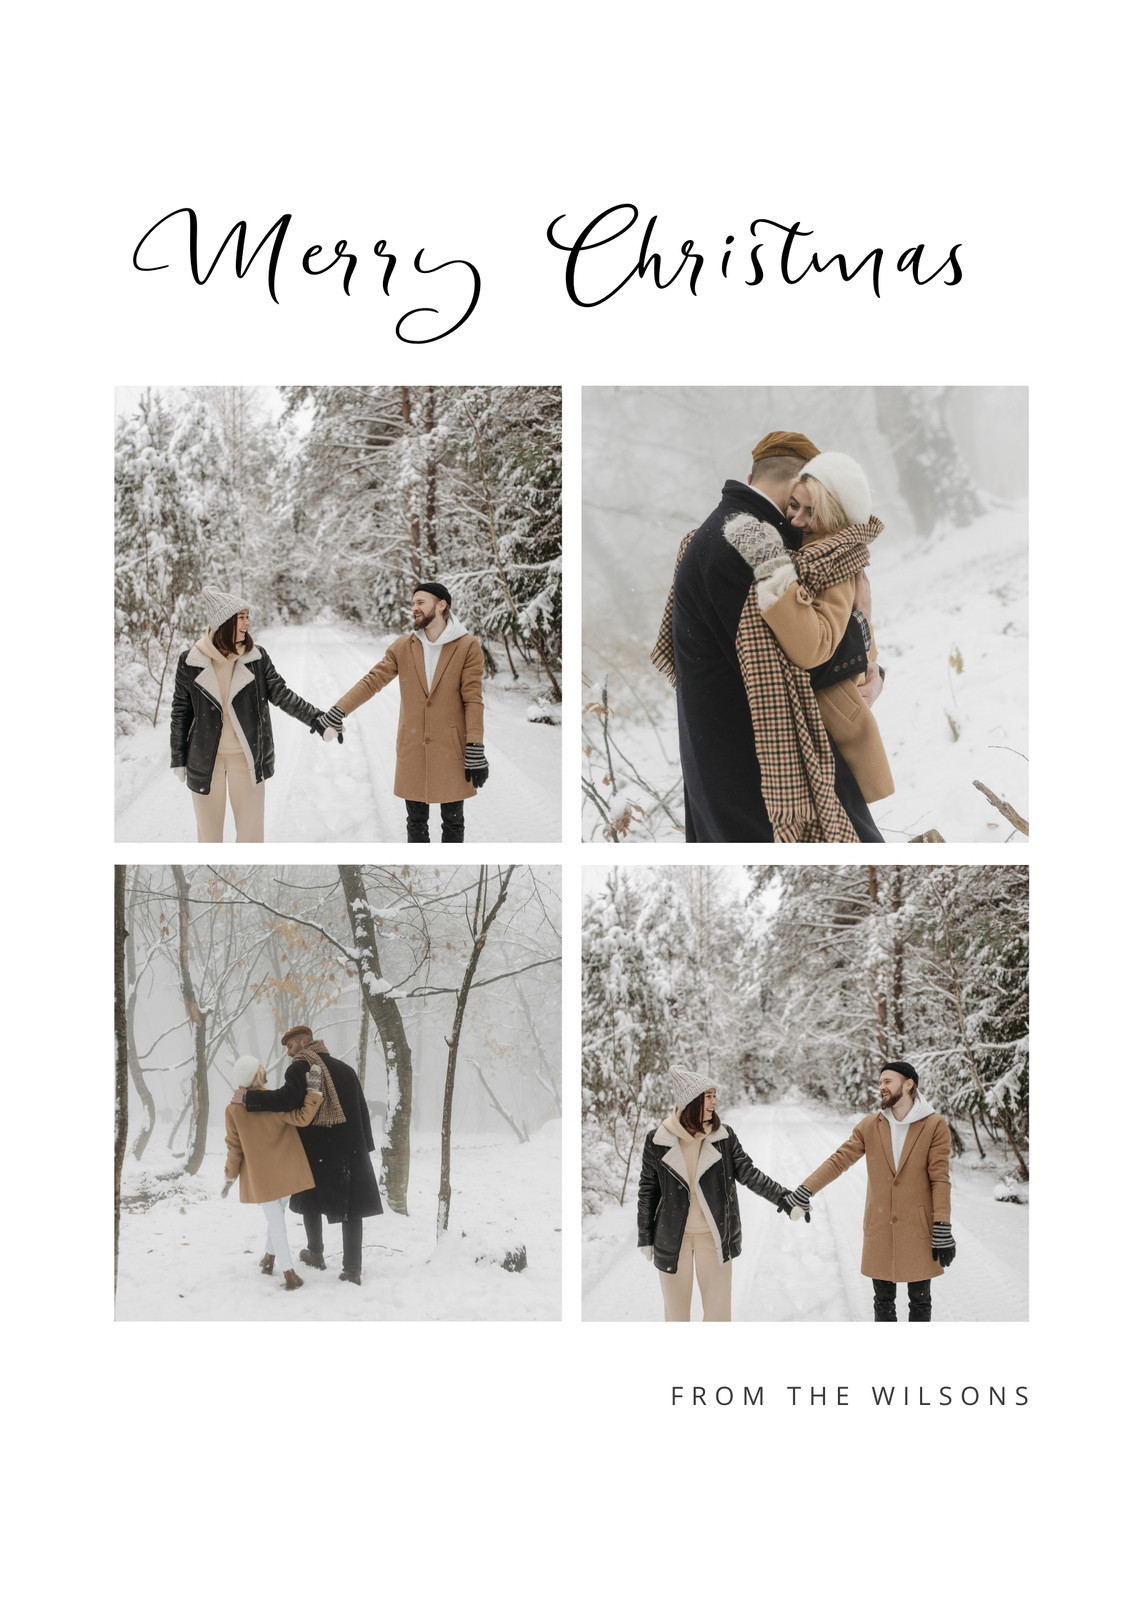 White Simple Calligraphy Photo Collage Christmas Card